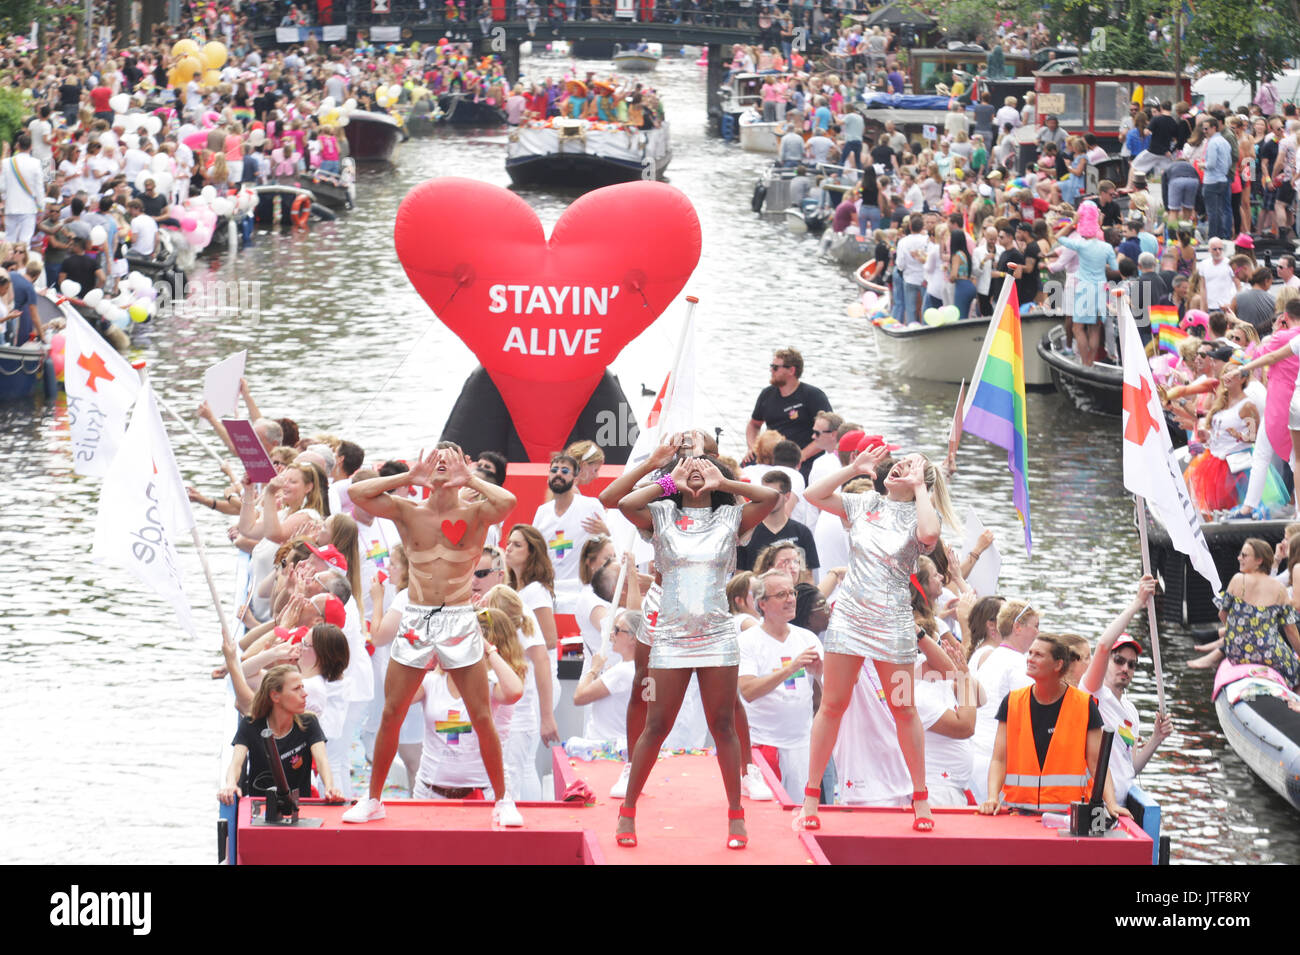 Revelers On The Boat In The Prinsengracht Canal Participating In The Amsterdam Canal Parade